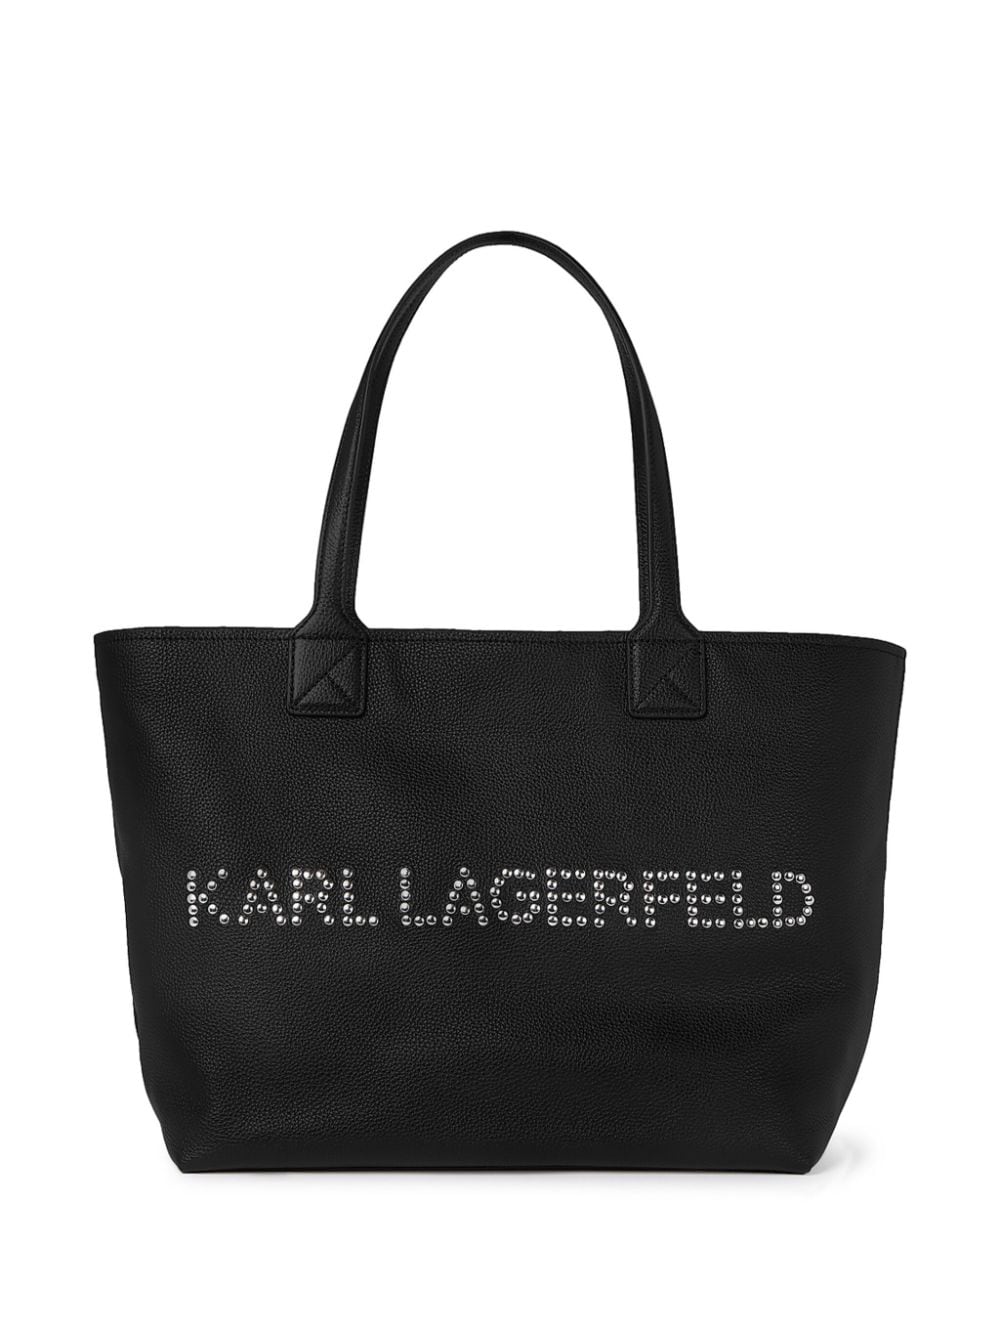 K/Marché leather tote bag